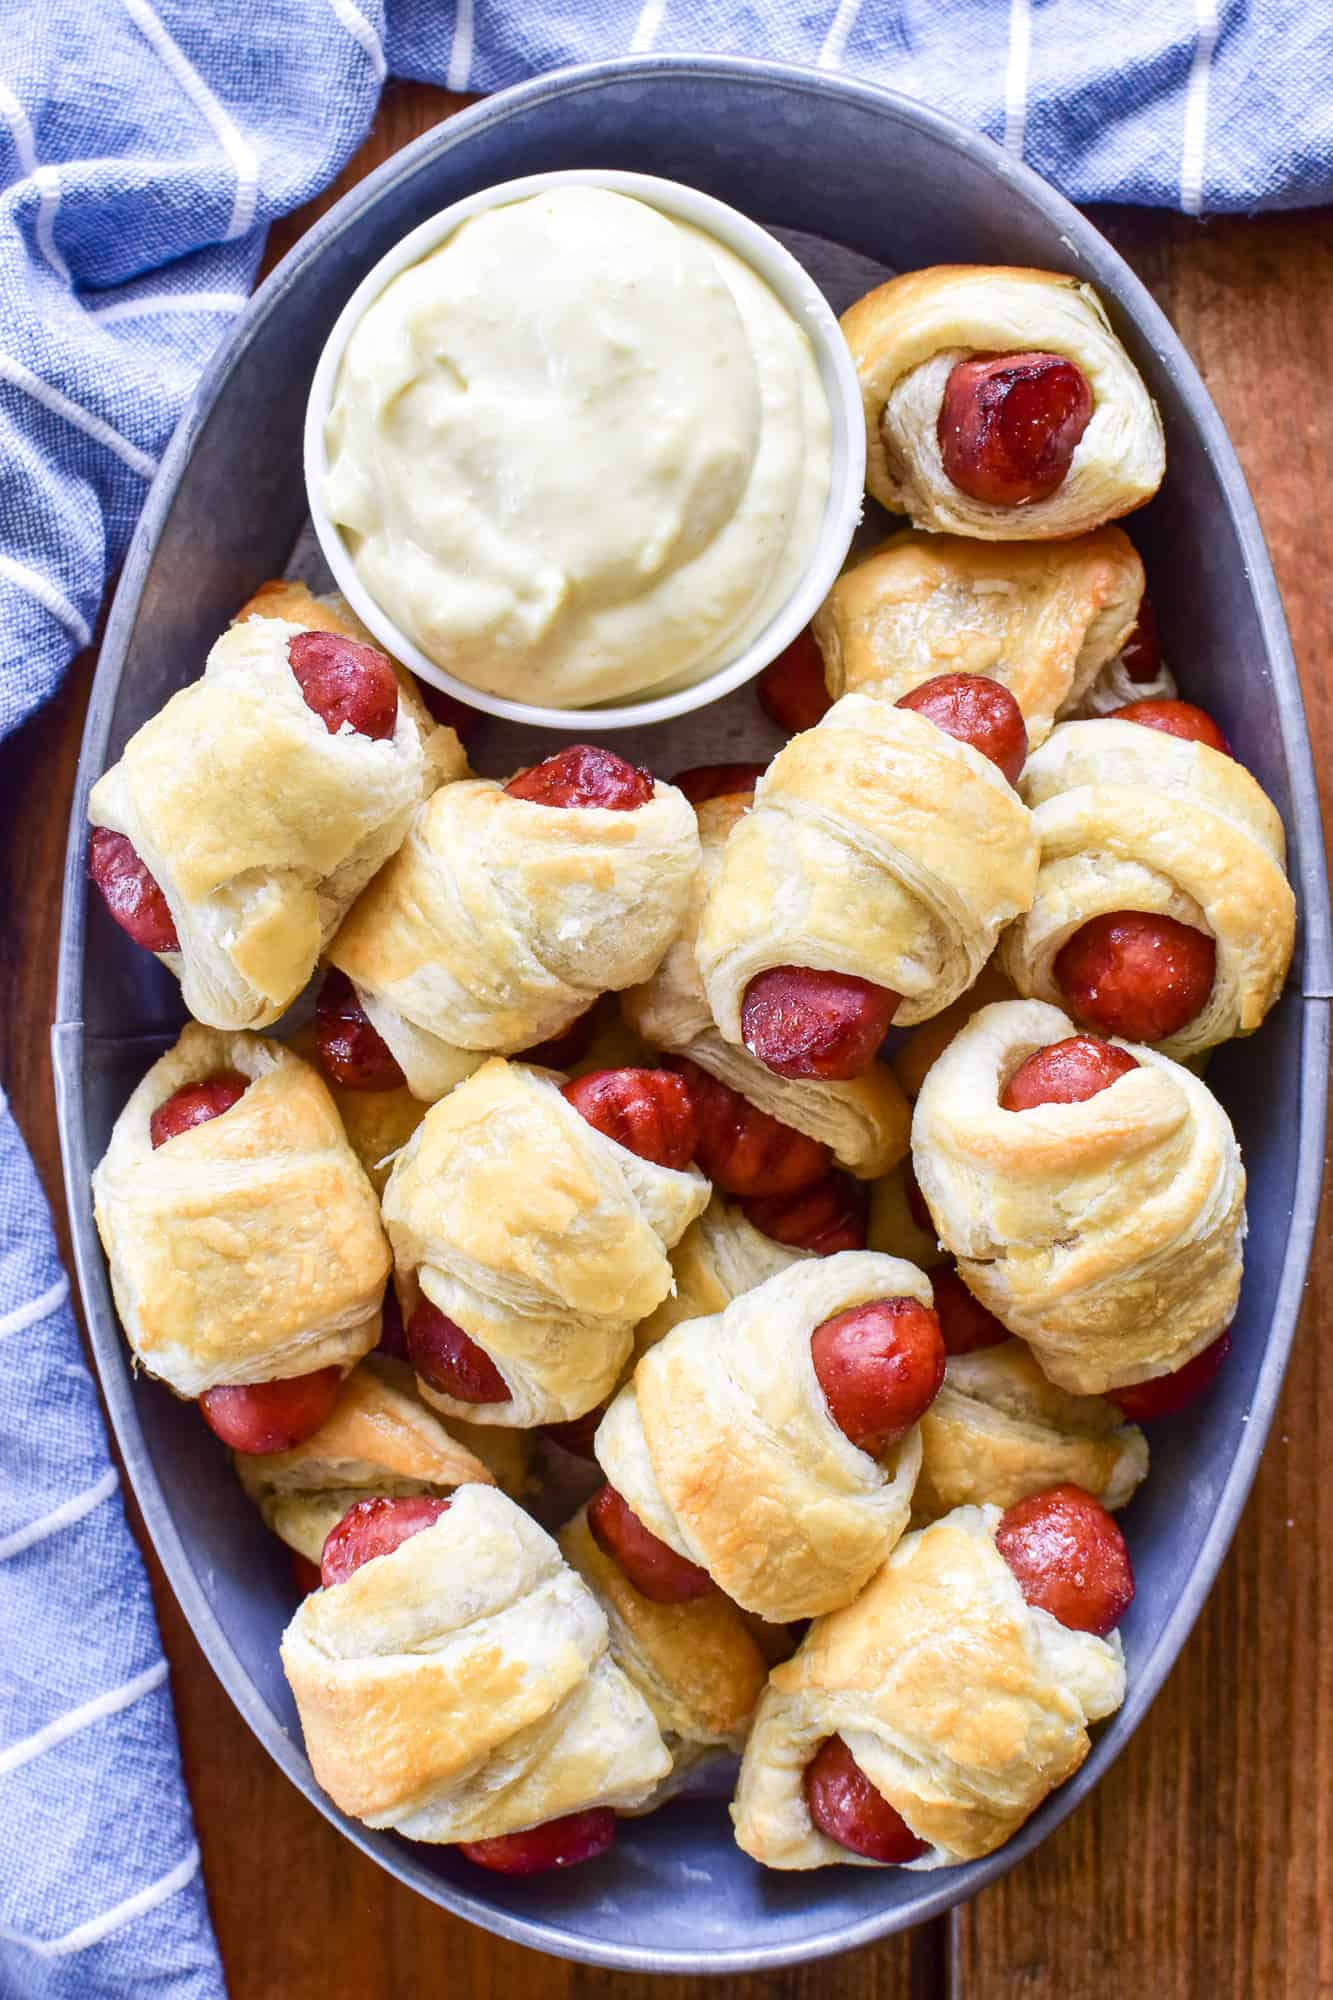 Overhead image of Pigs in a Blanket with Wasabi Mayo Sauce